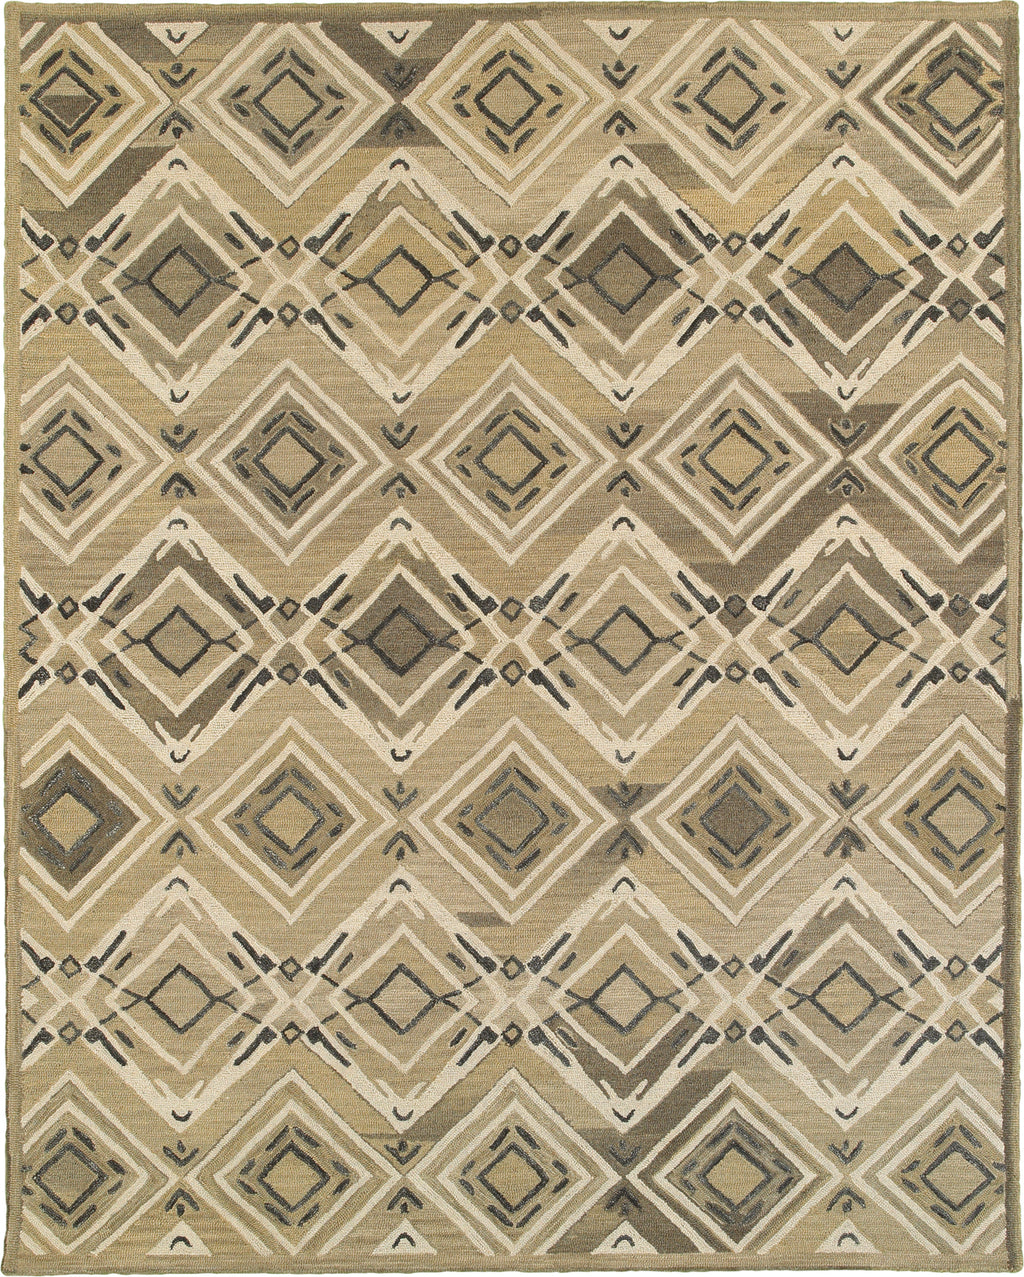 LR Resources Integrity 12014 Brown Area Rug main image